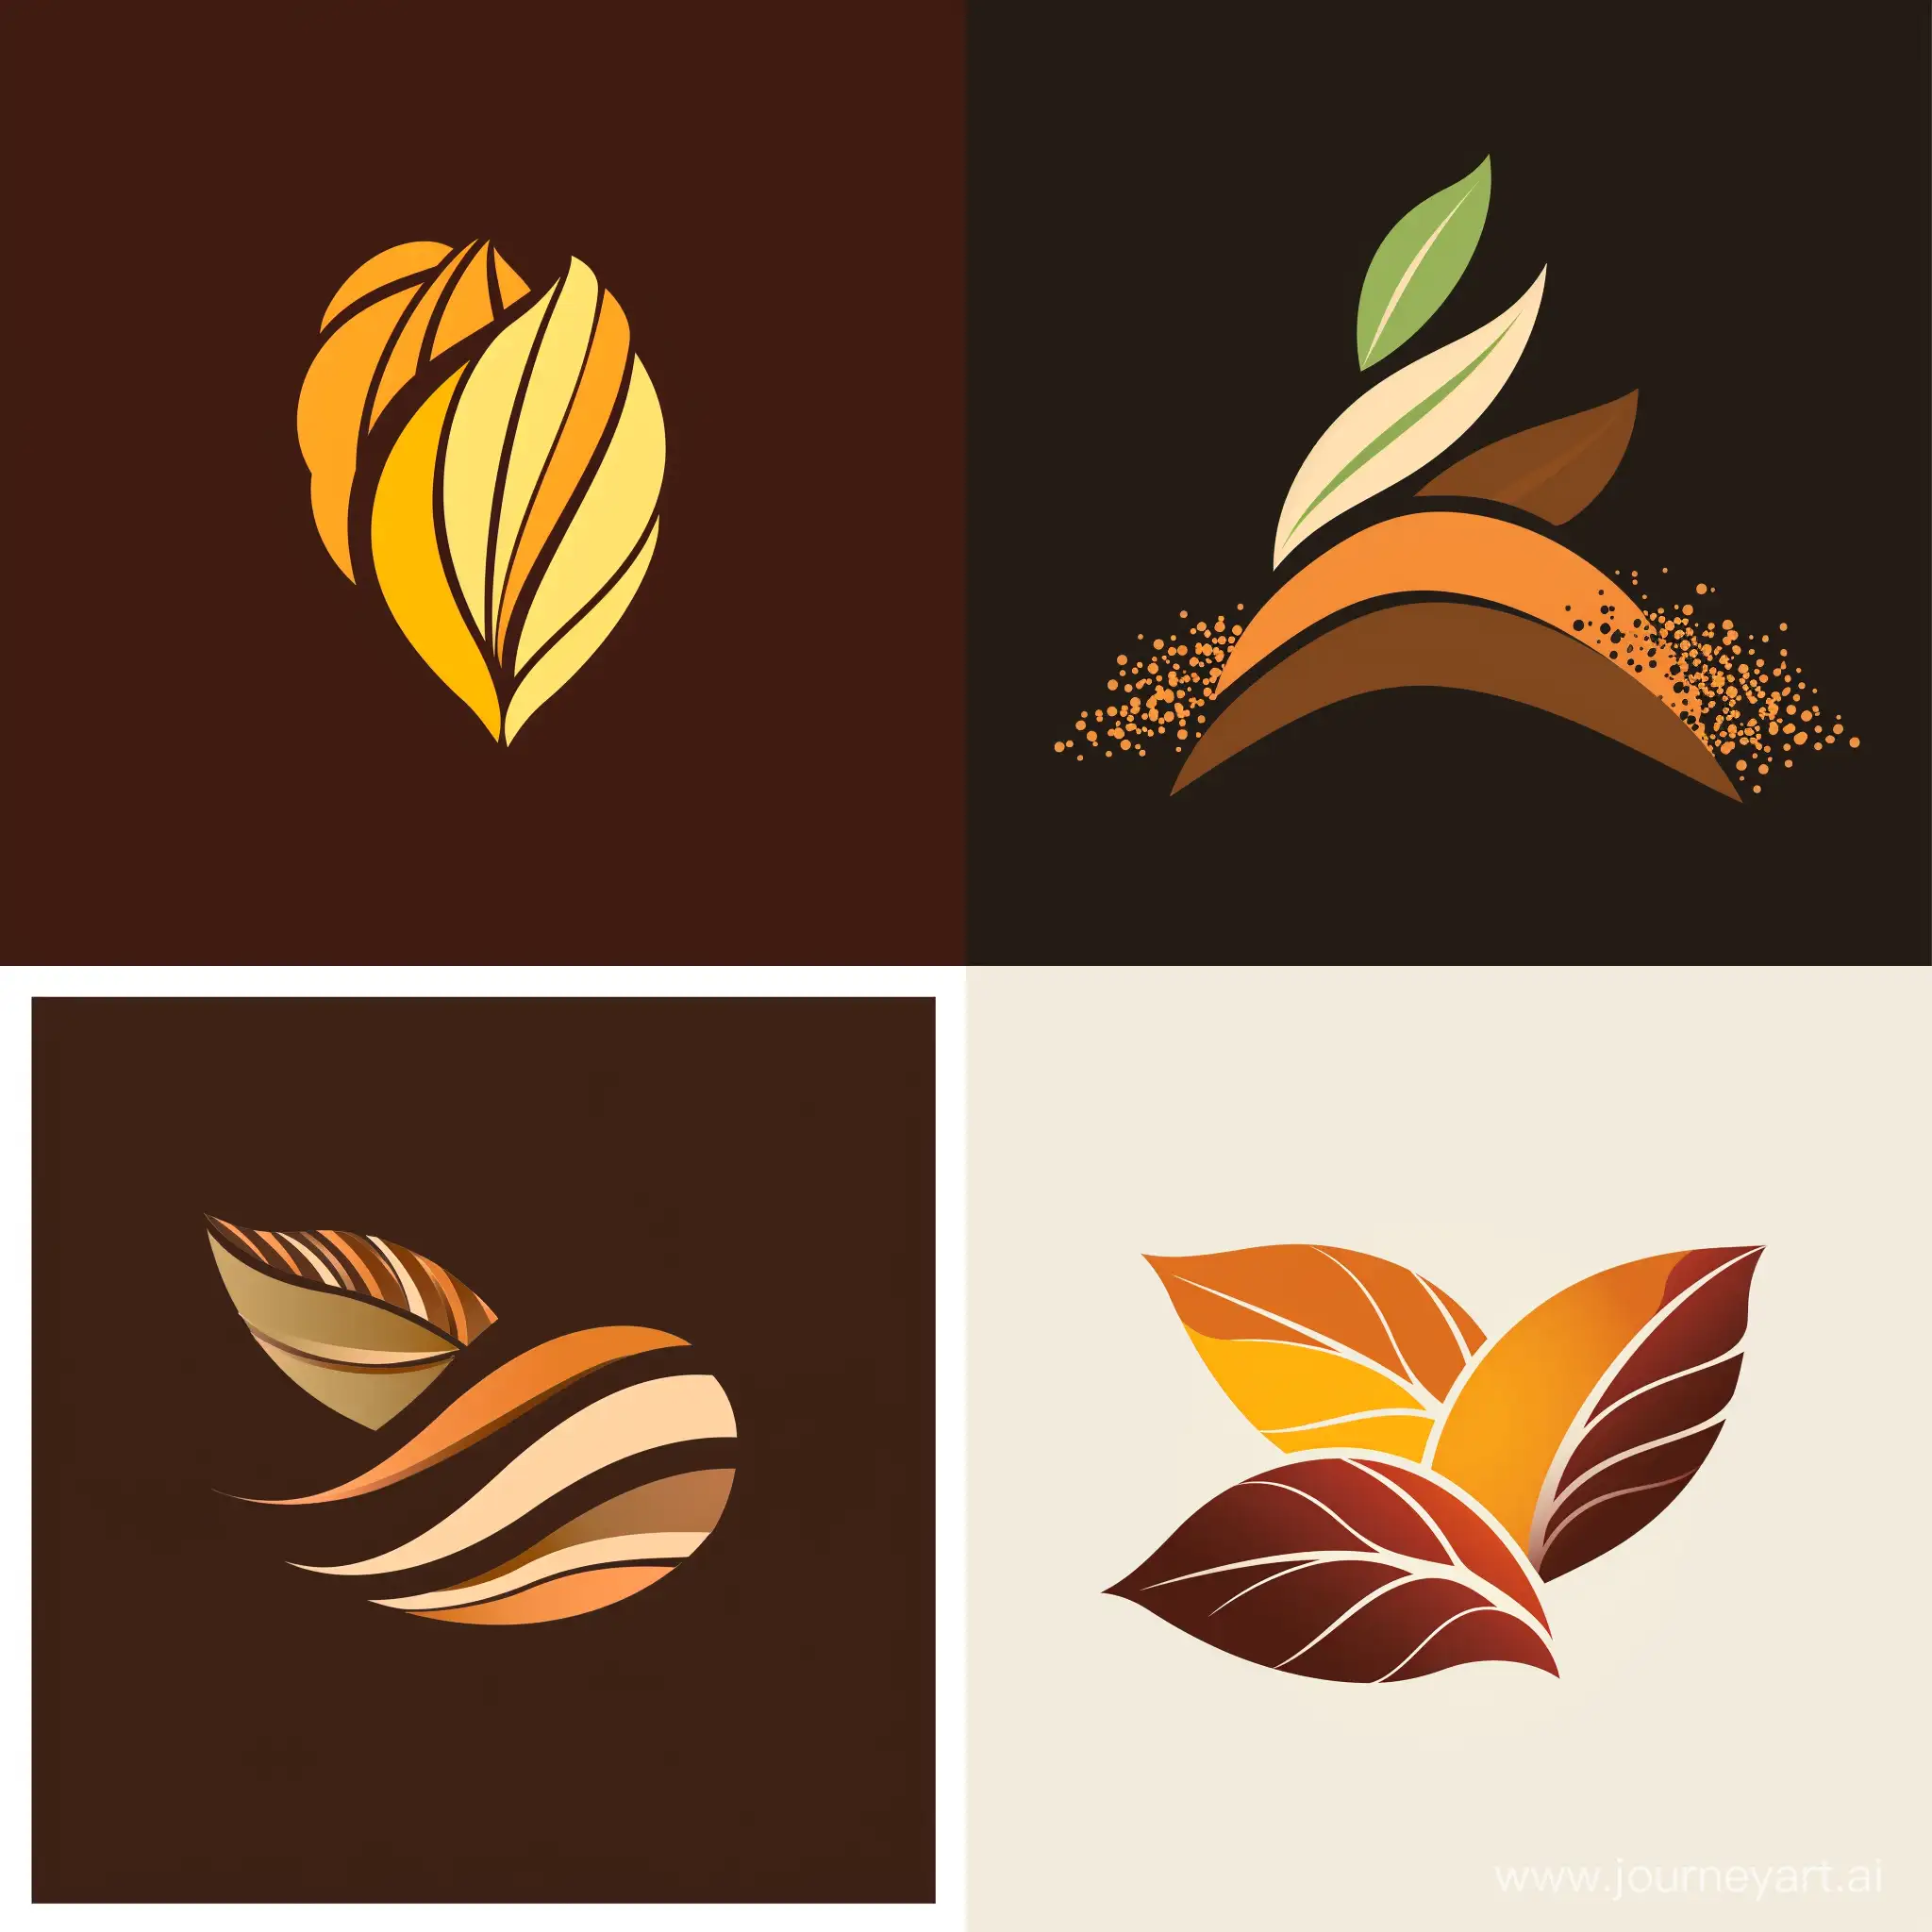 As the proprietor of PT Brilian Zenco Agroindo in Indonesia, a chocolate powder factory catering to B2B clients, I am in search of a straightforward yet elegant company logo. The design should exude splendor, employing colors that leave a memorable impression within the first 3 seconds of viewing.